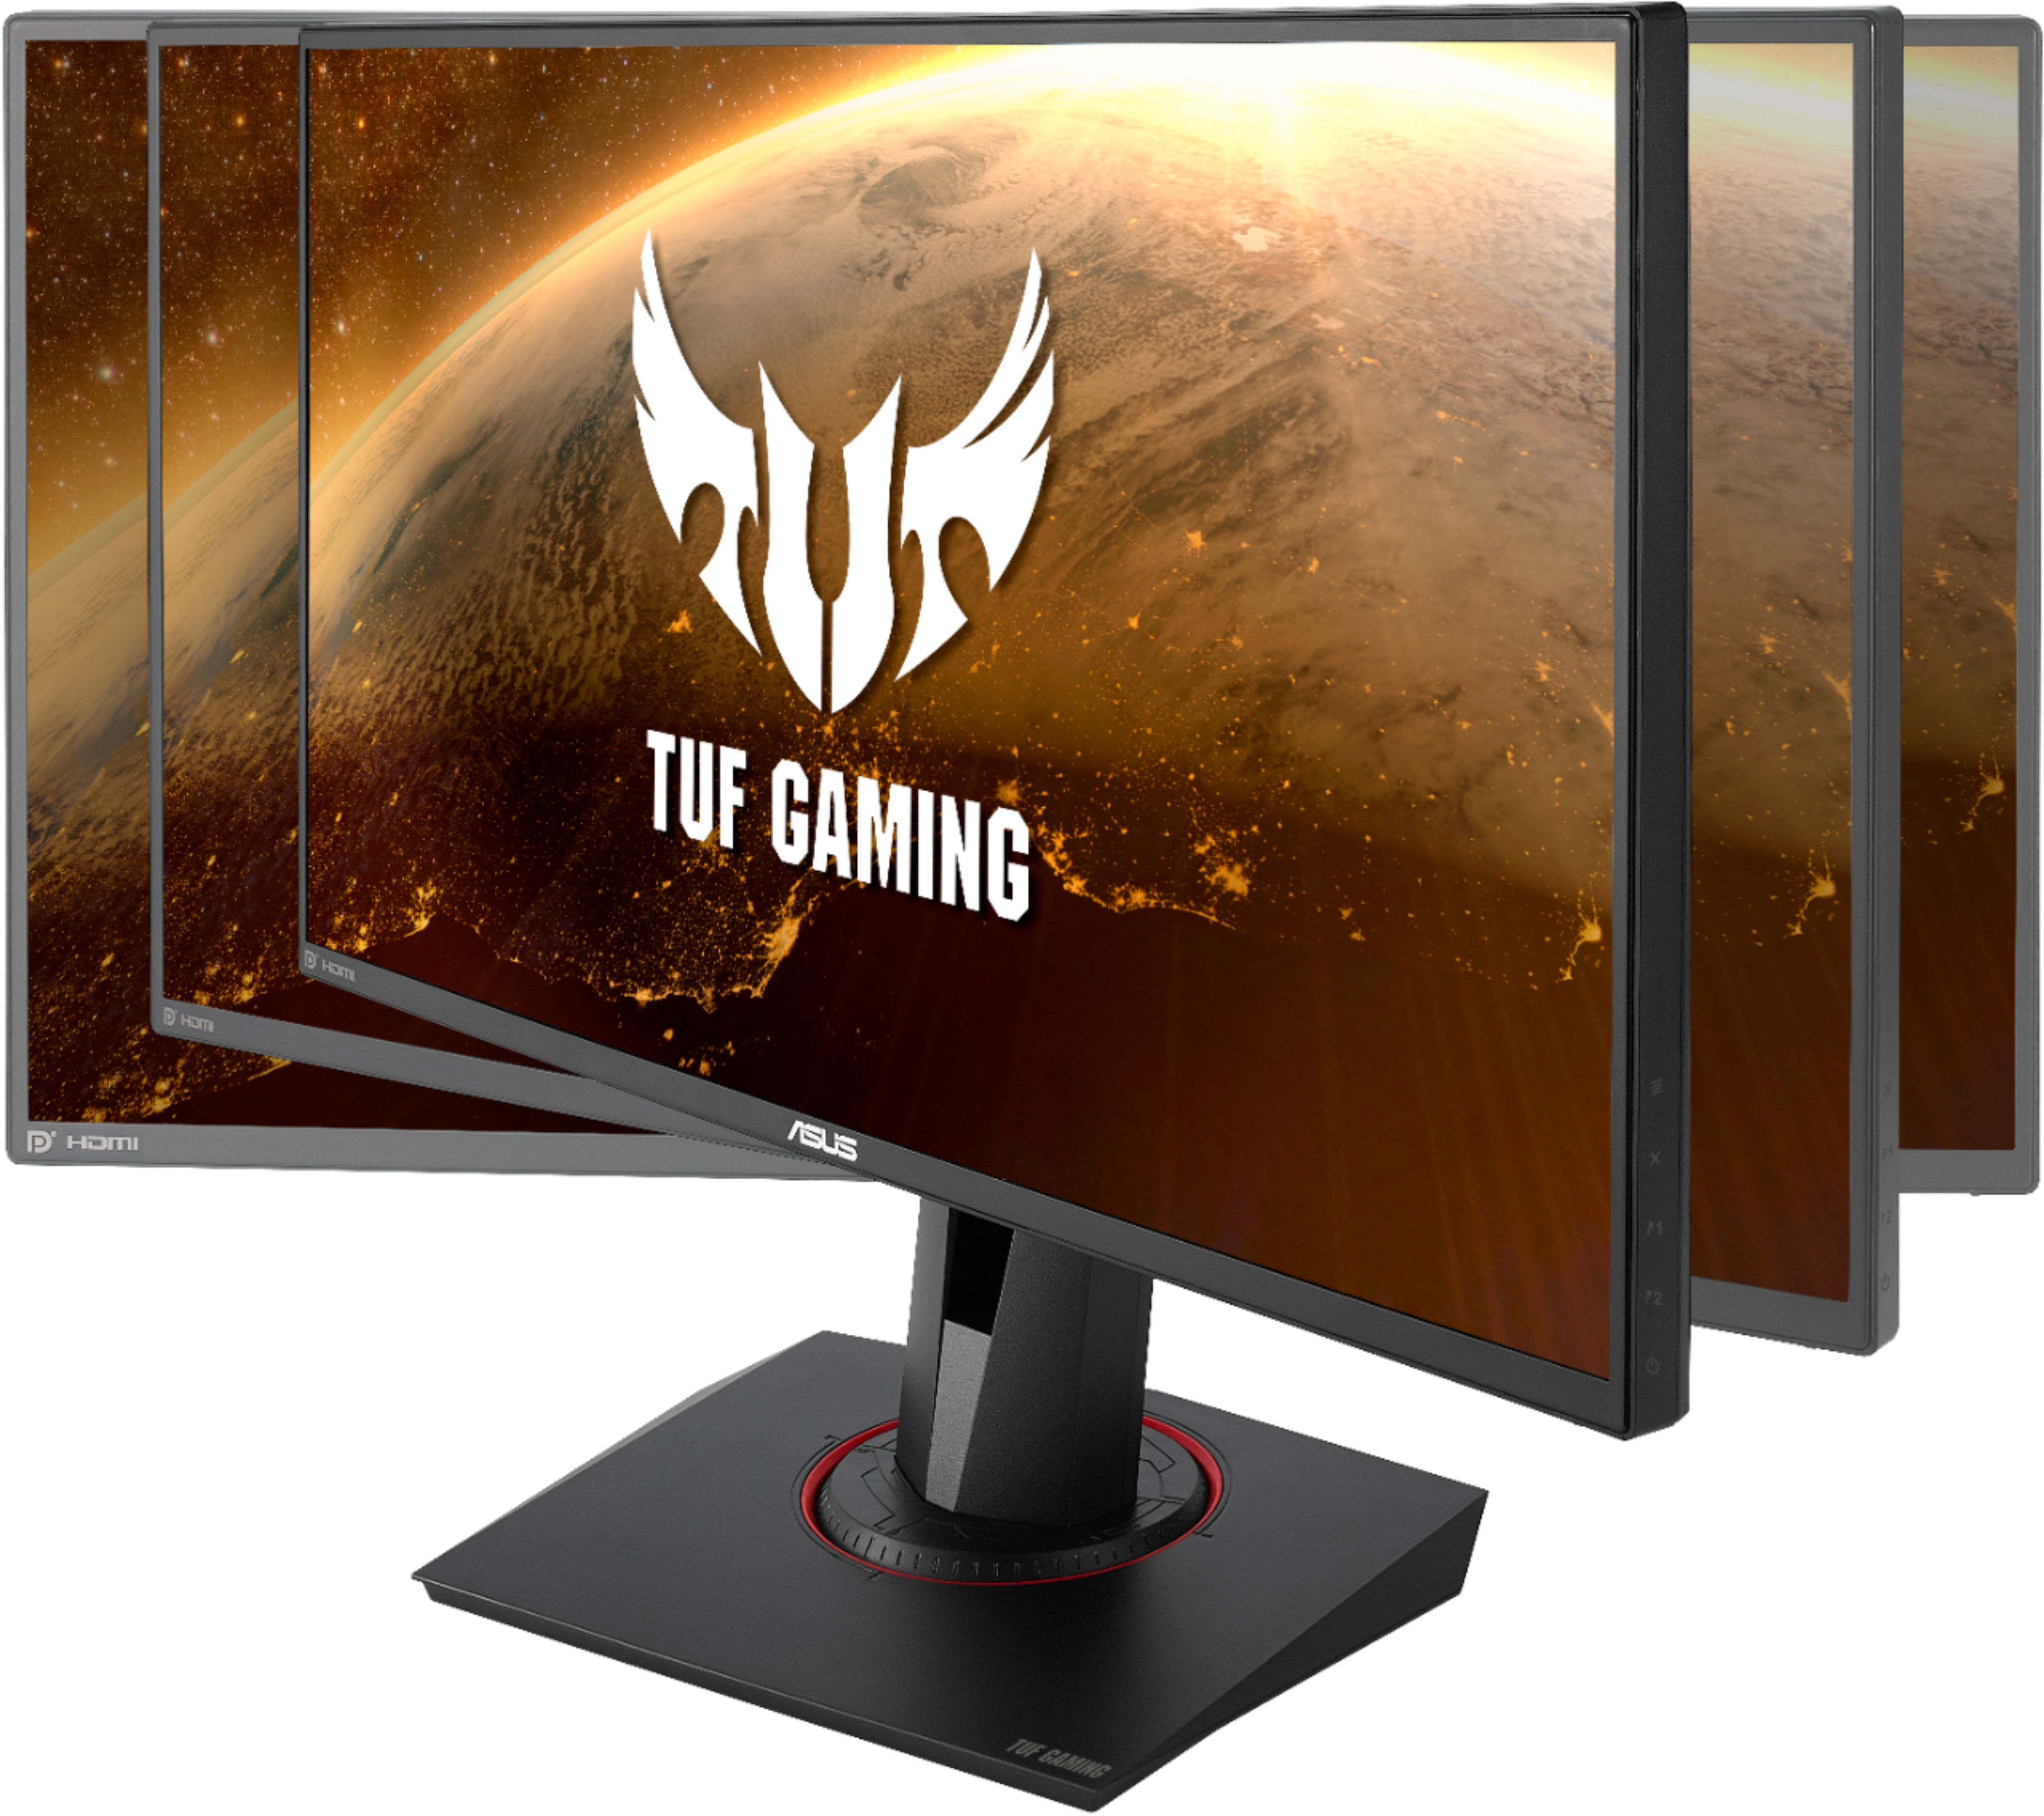 Back View: ASUS - Geek Squad Certified Refurbished TUF Gaming 24.5" IPS LED FHD G-SYNC Monitor with HDR - Black